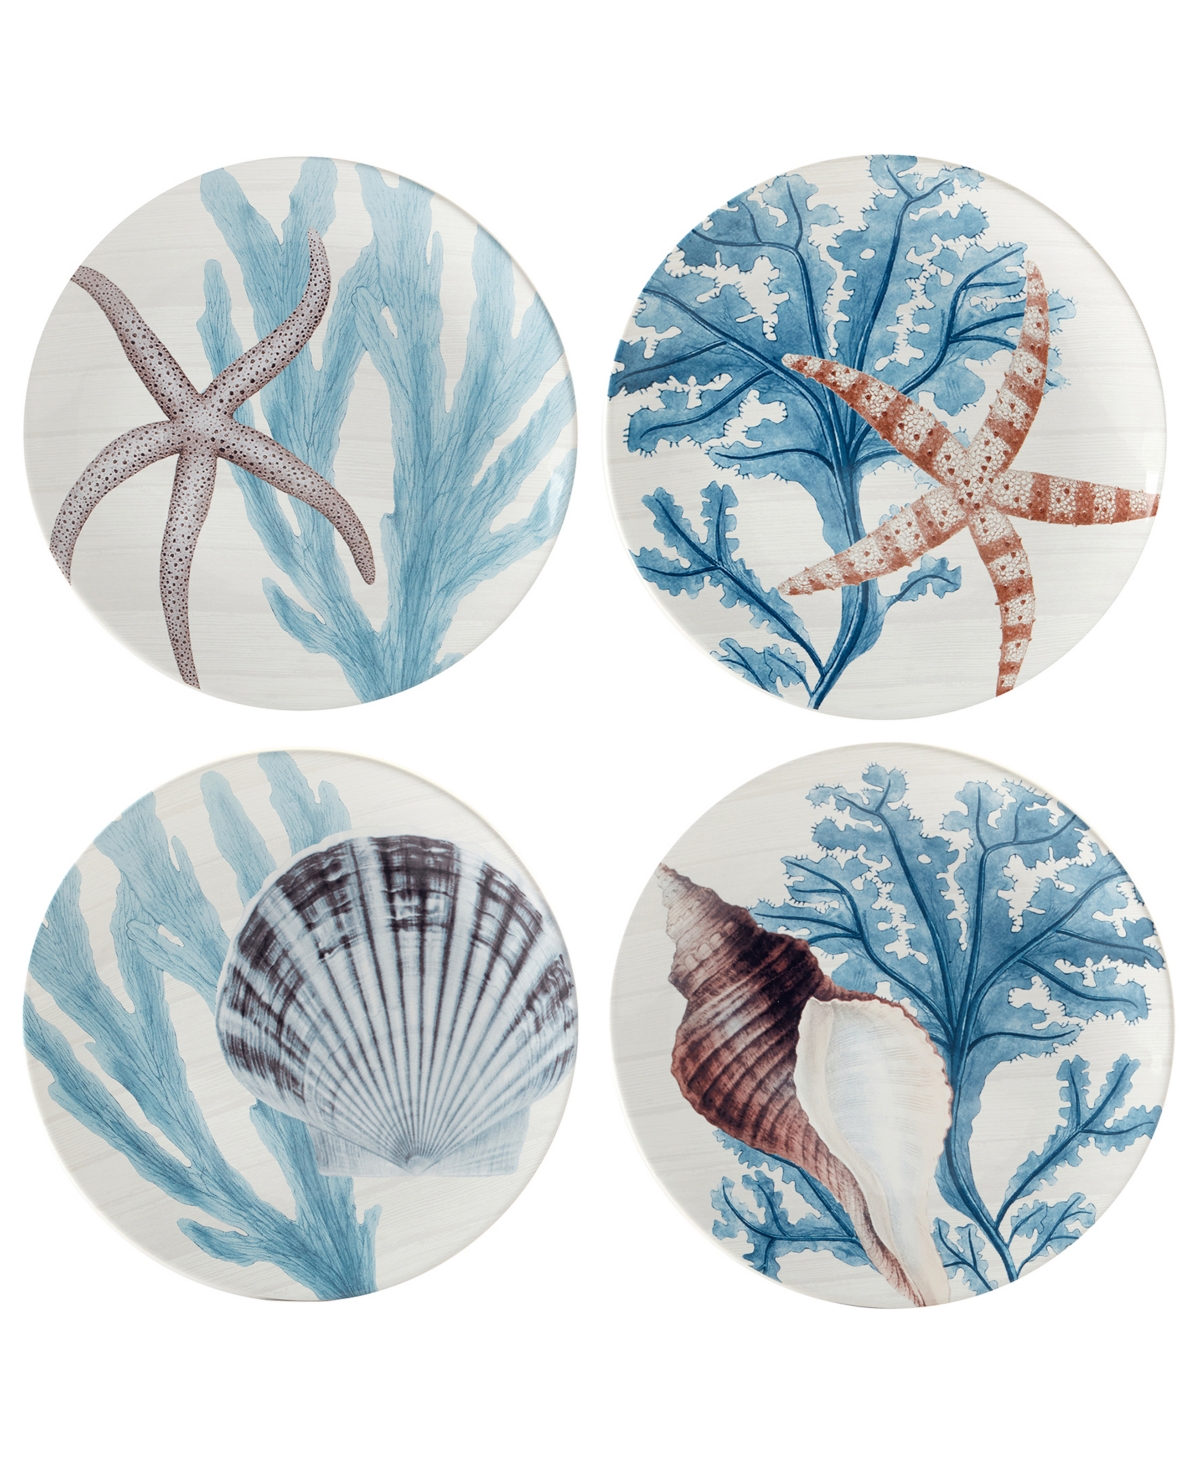 Beyond the Shore Set of 4 Dinner Plates - Miscellaneous